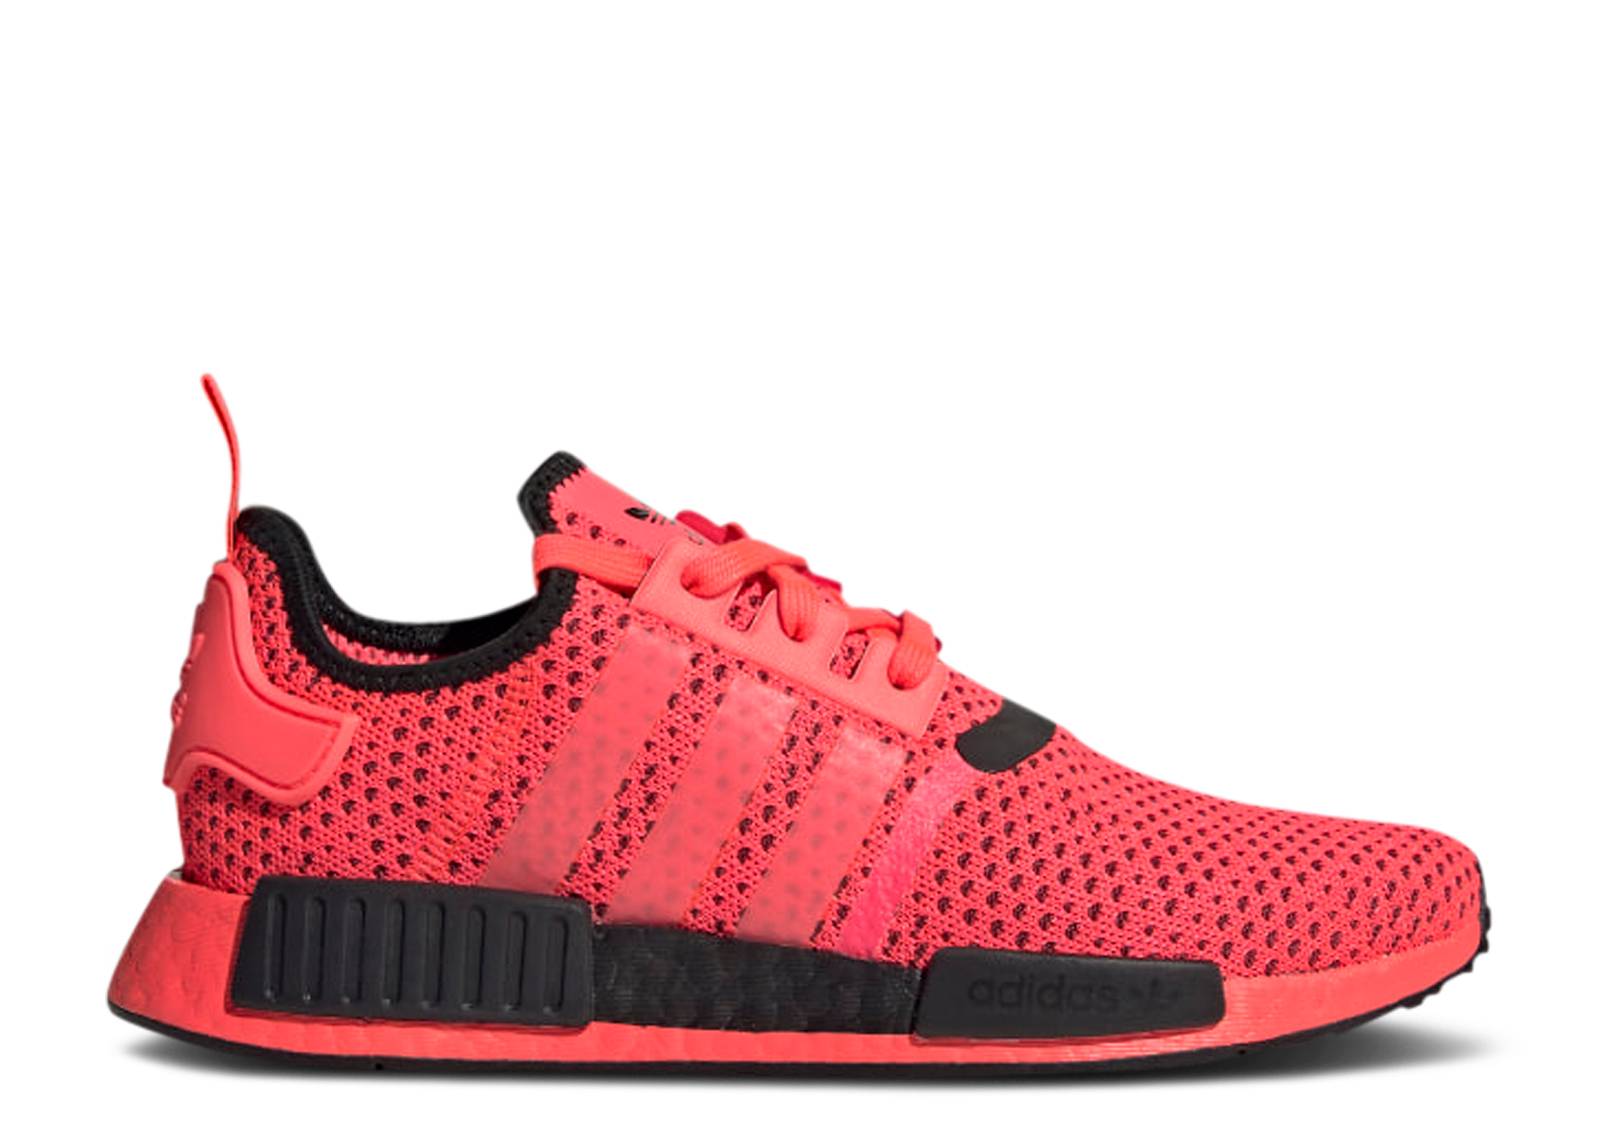 NMD_R1 Knit 'Signal Pink'